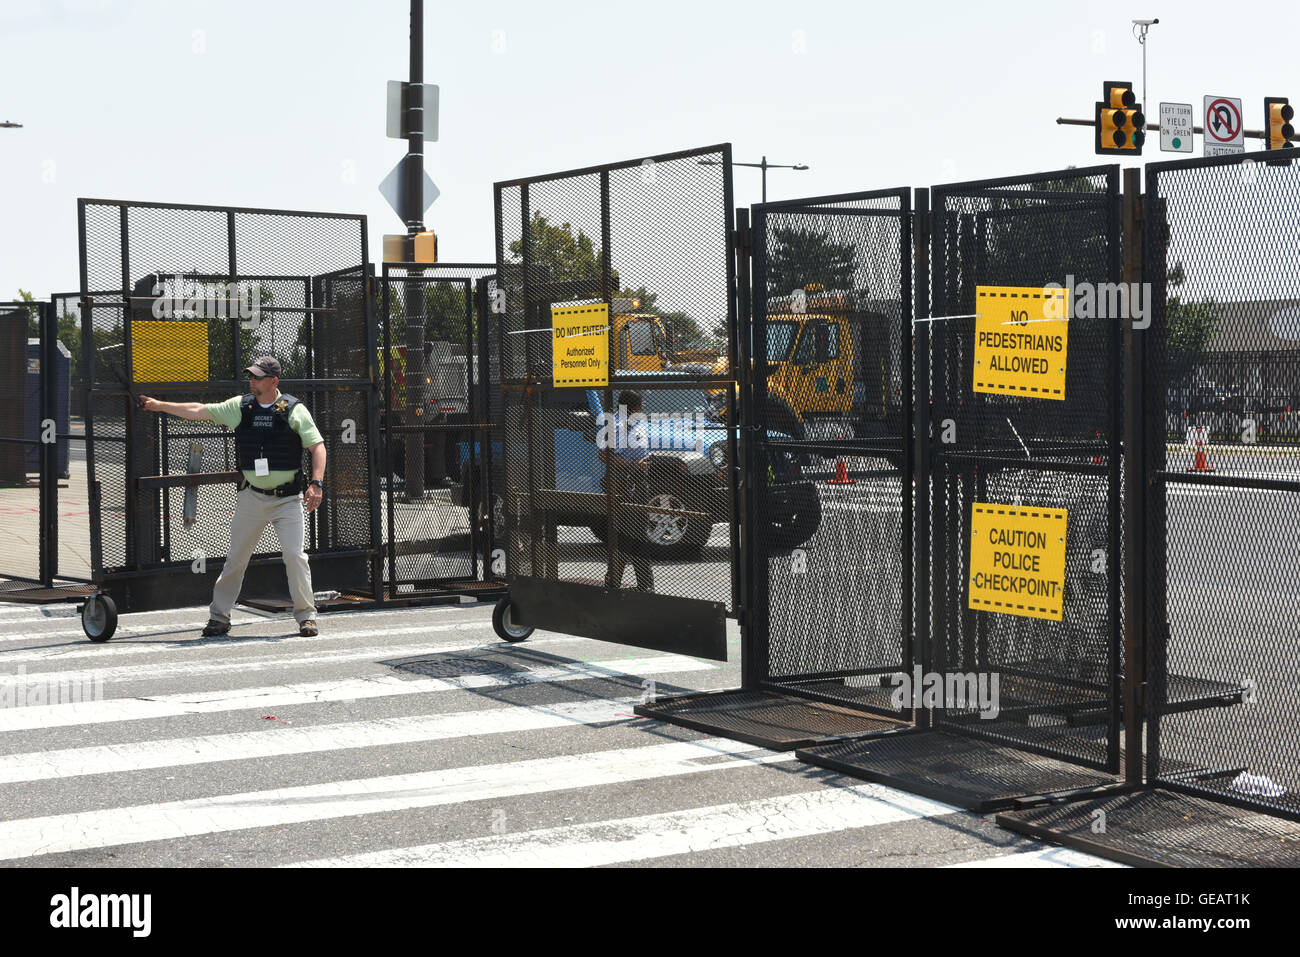 usa - images Police hi-res stock checkpoint Alamy and photography